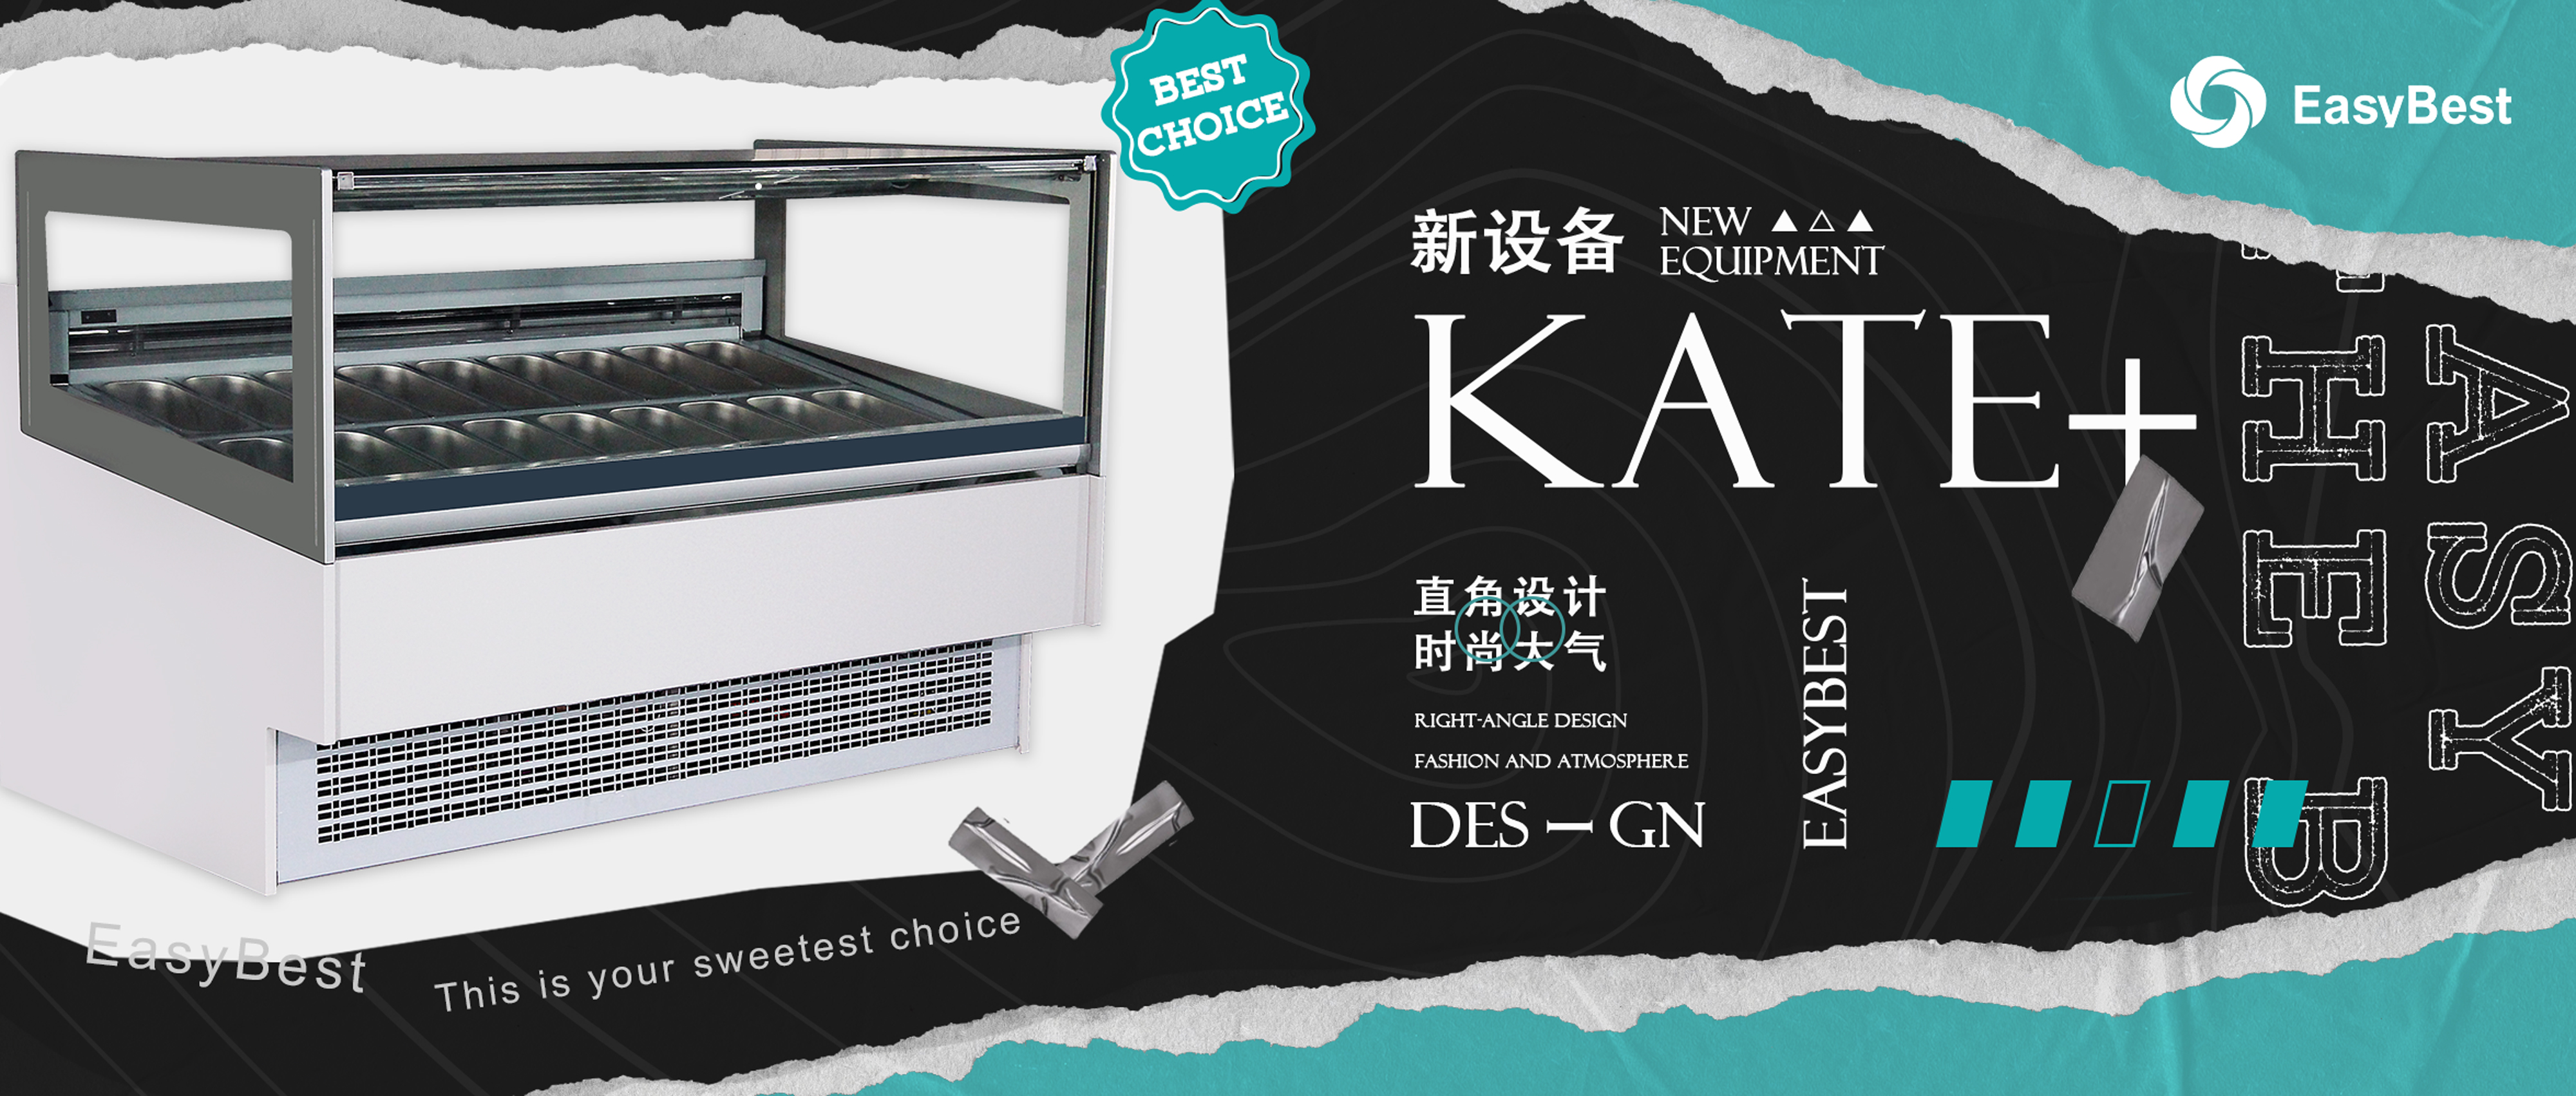 The new professional gelato showcase cabinet KATE+ is here!